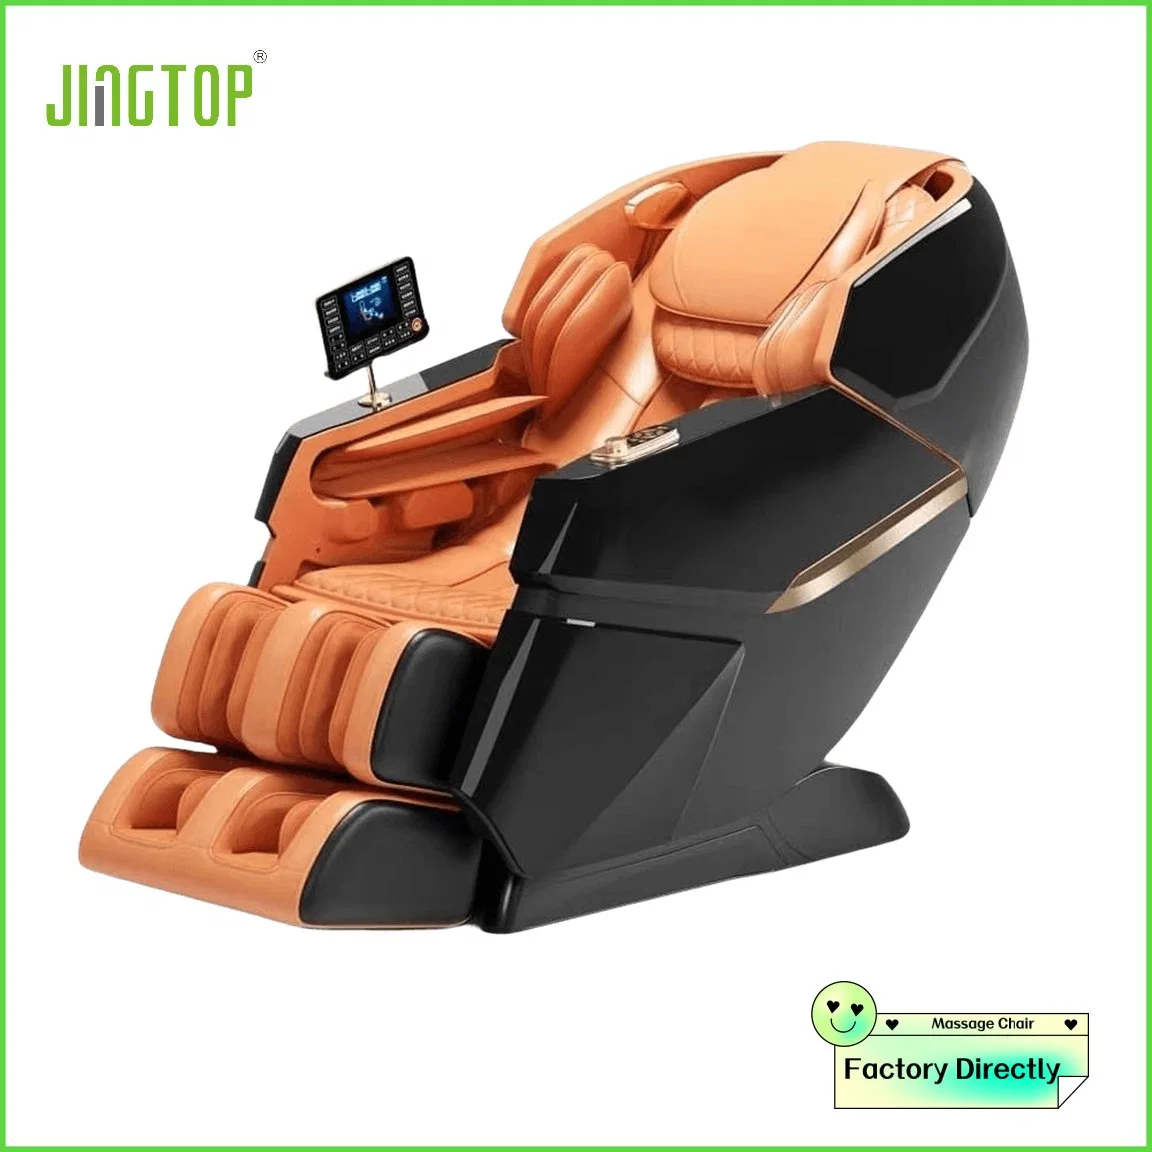 Jingtop Commercial Luxury Massage Chair 4D SL Full Body Airbags Heat Therapy Massage Chair